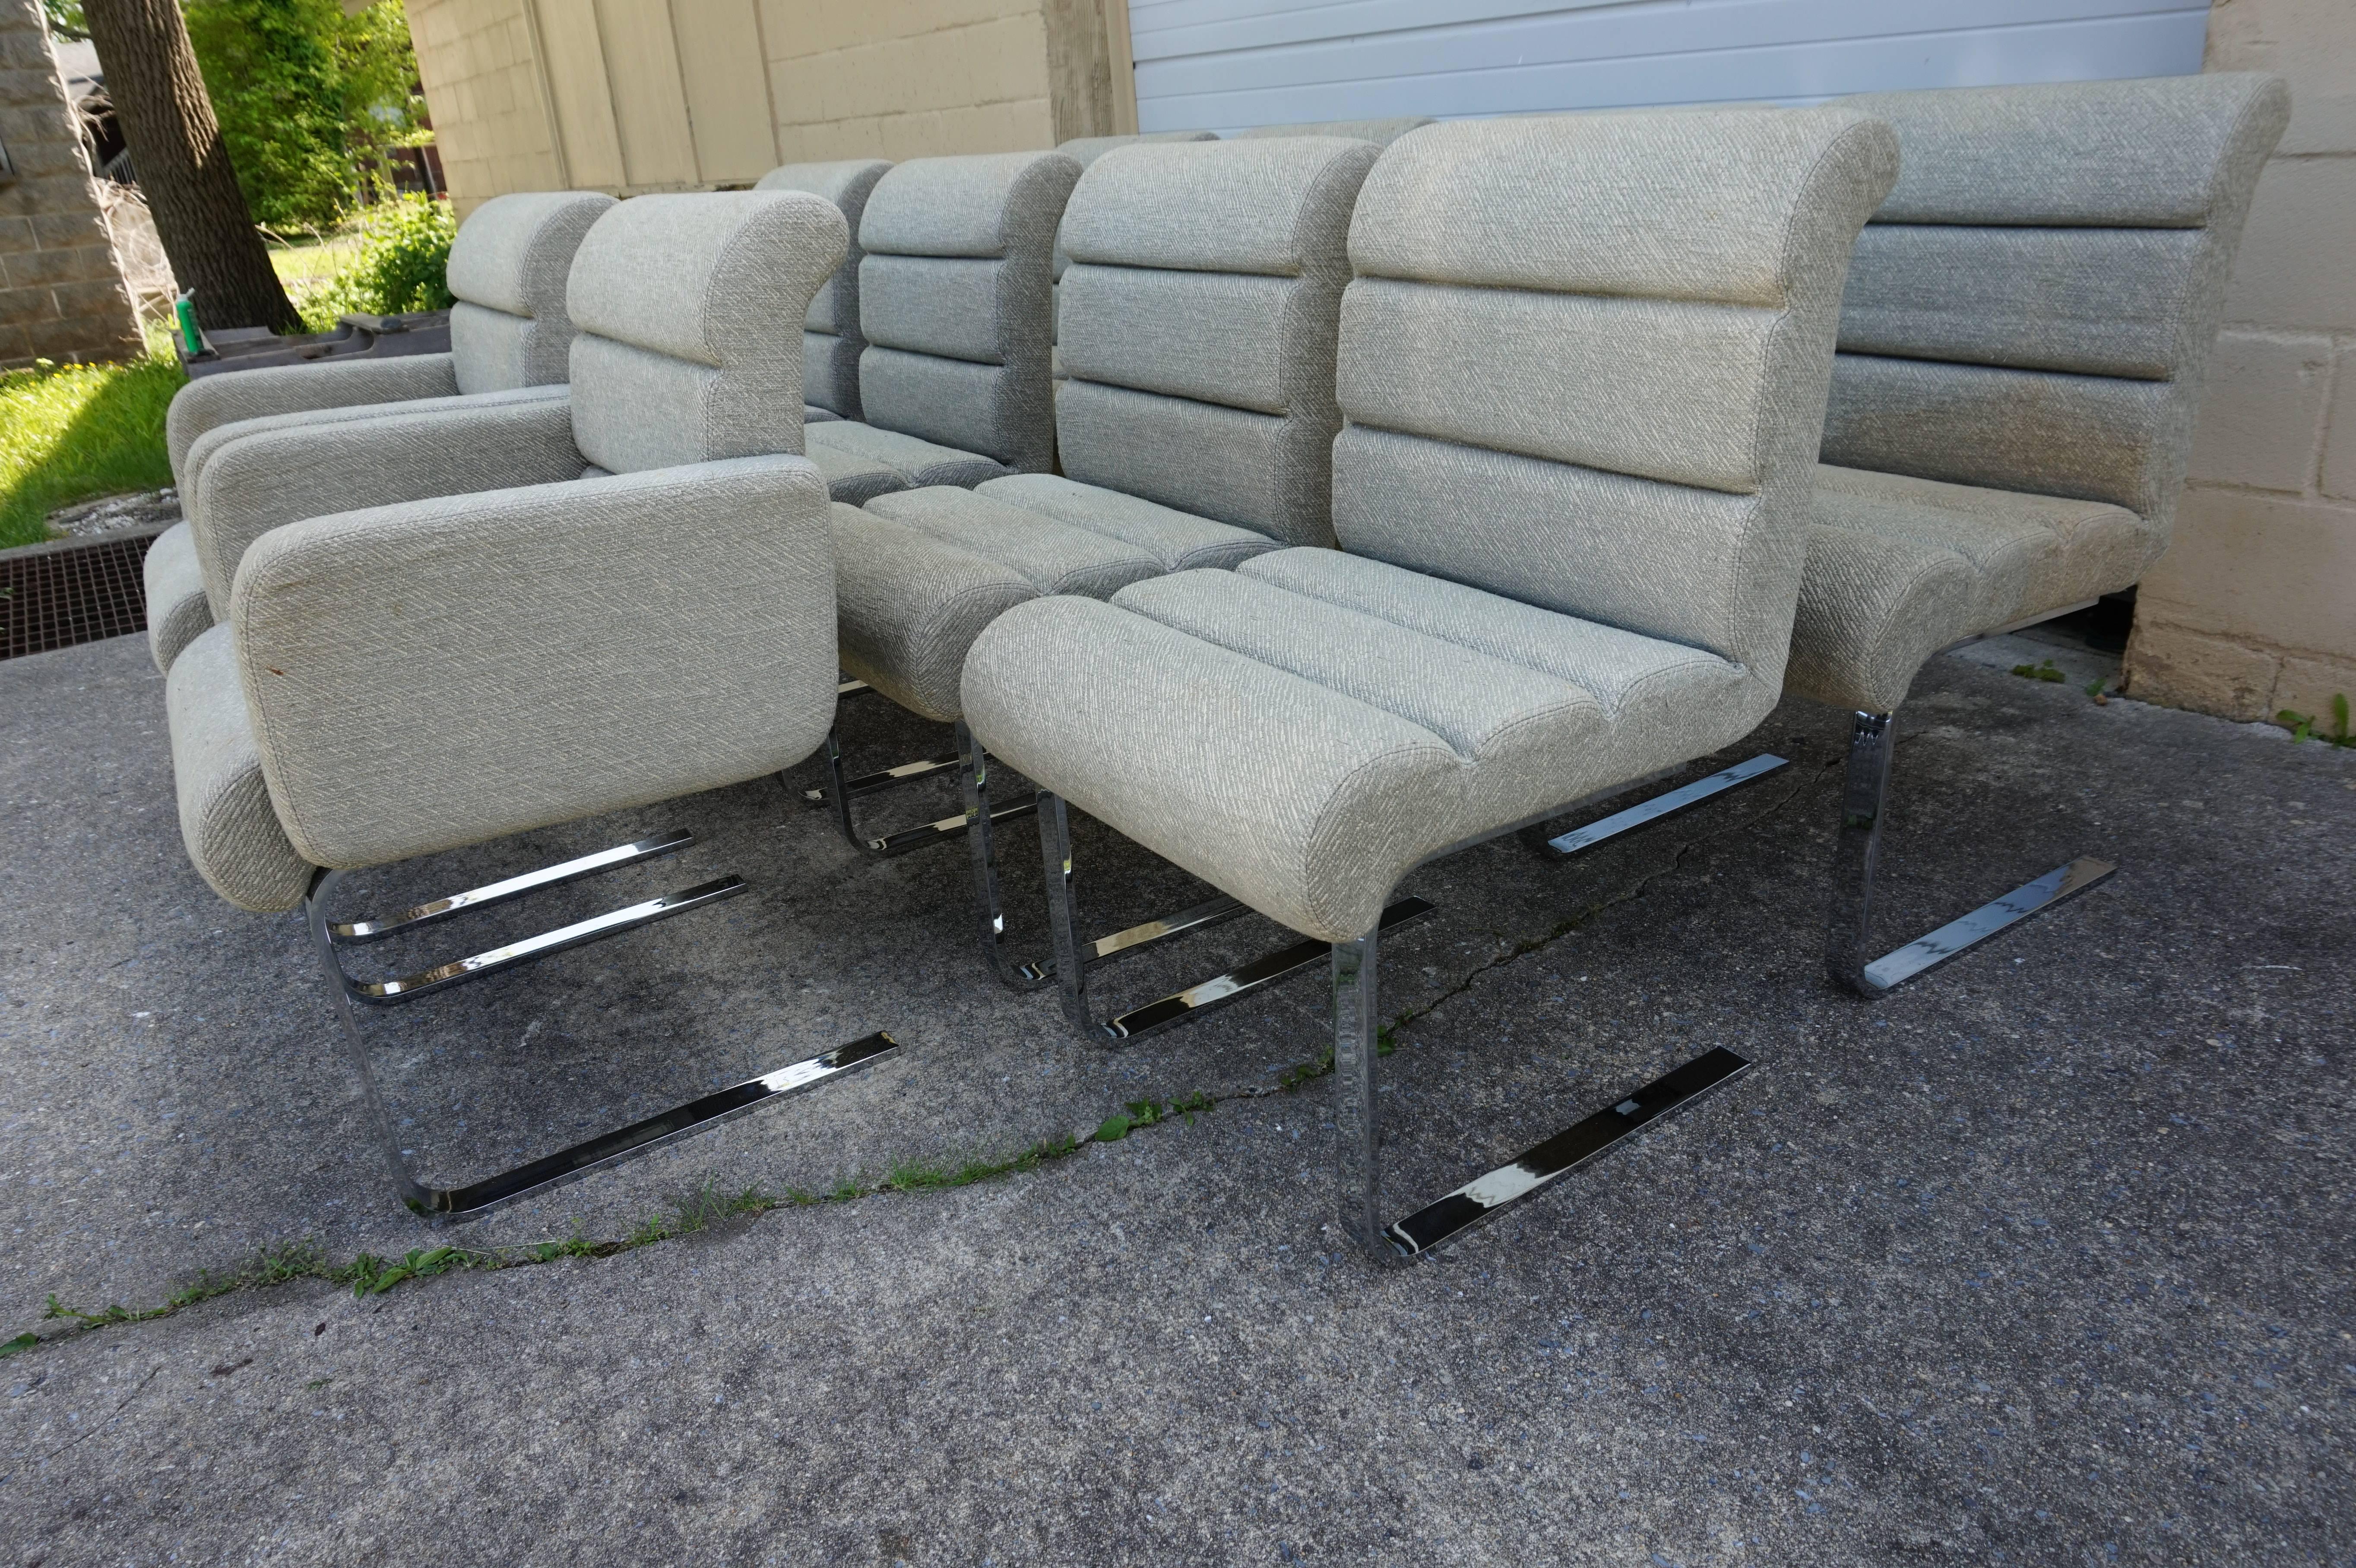 Large set of ten Mariani Laguna Pace Collection cantilevered chrome dining chairs. The chairs retain their original fabric which will need re-upholstery. Heavy steel frames are in excellent condition with only very minor wear. The two armchairs